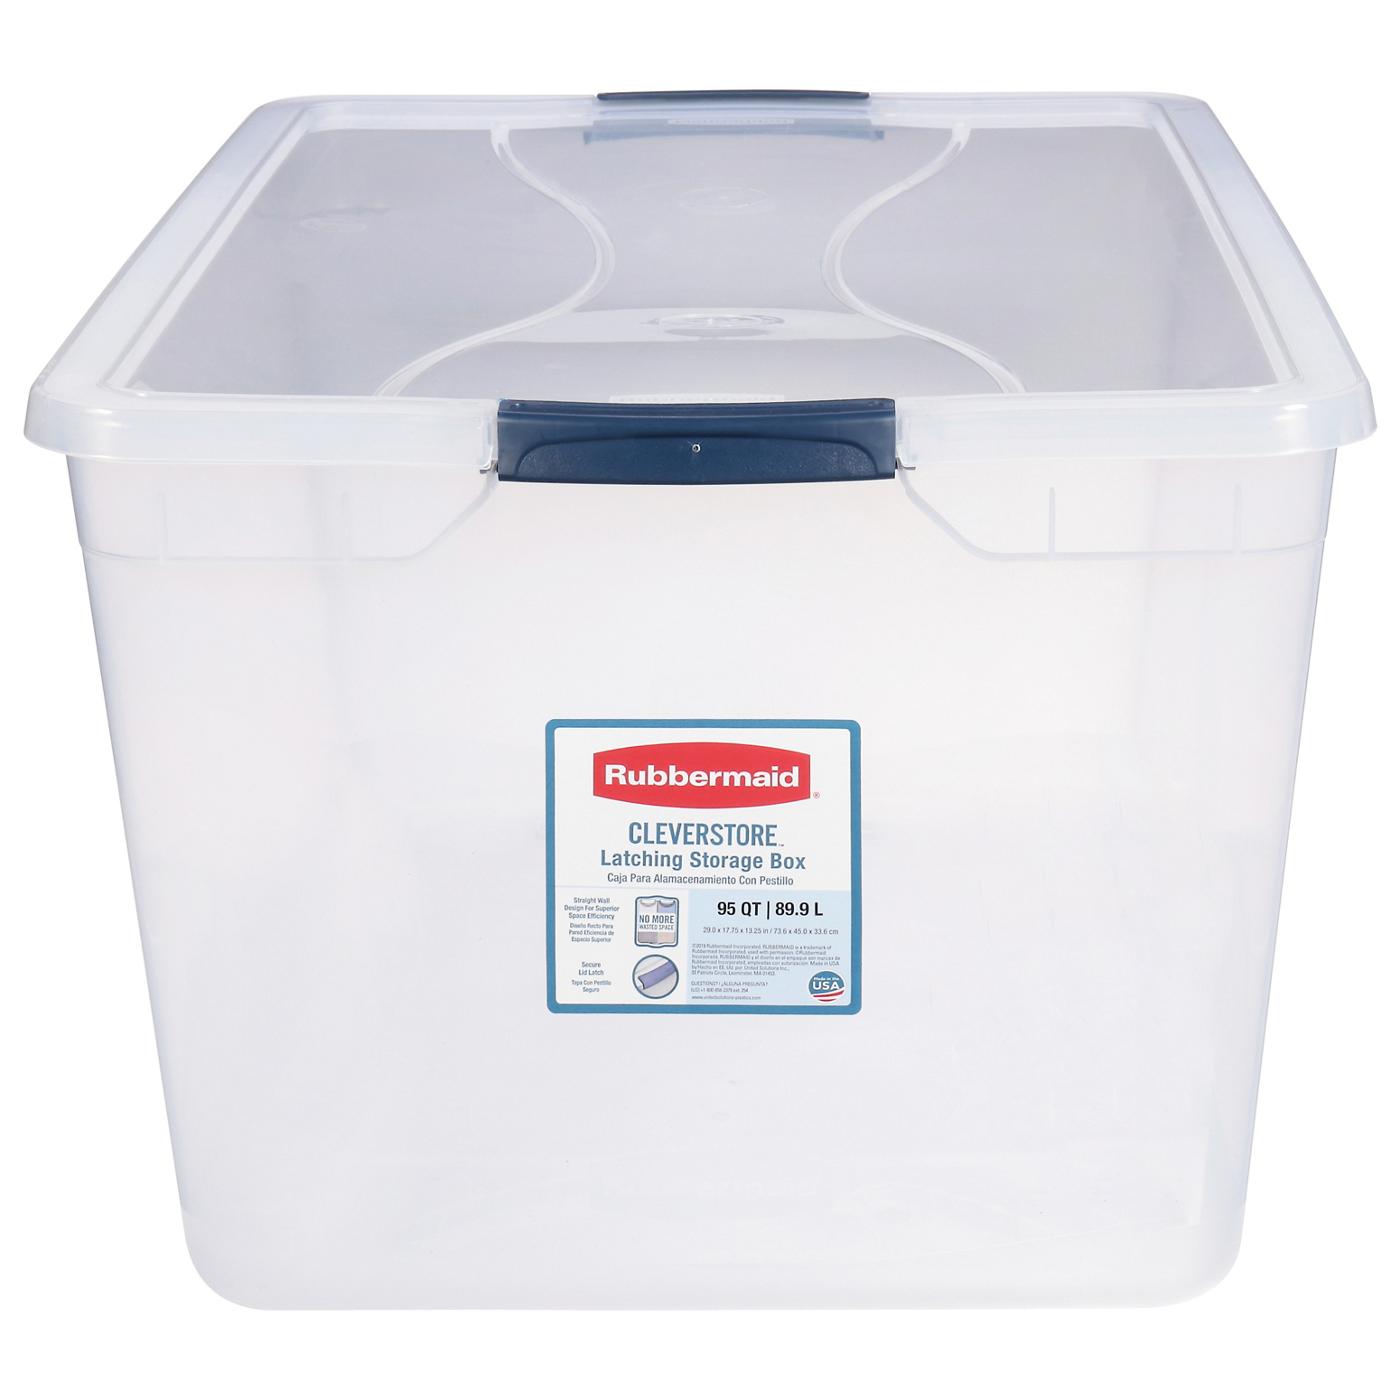 Rubbermaid Cleverstore Latching Storage Box; image 1 of 4